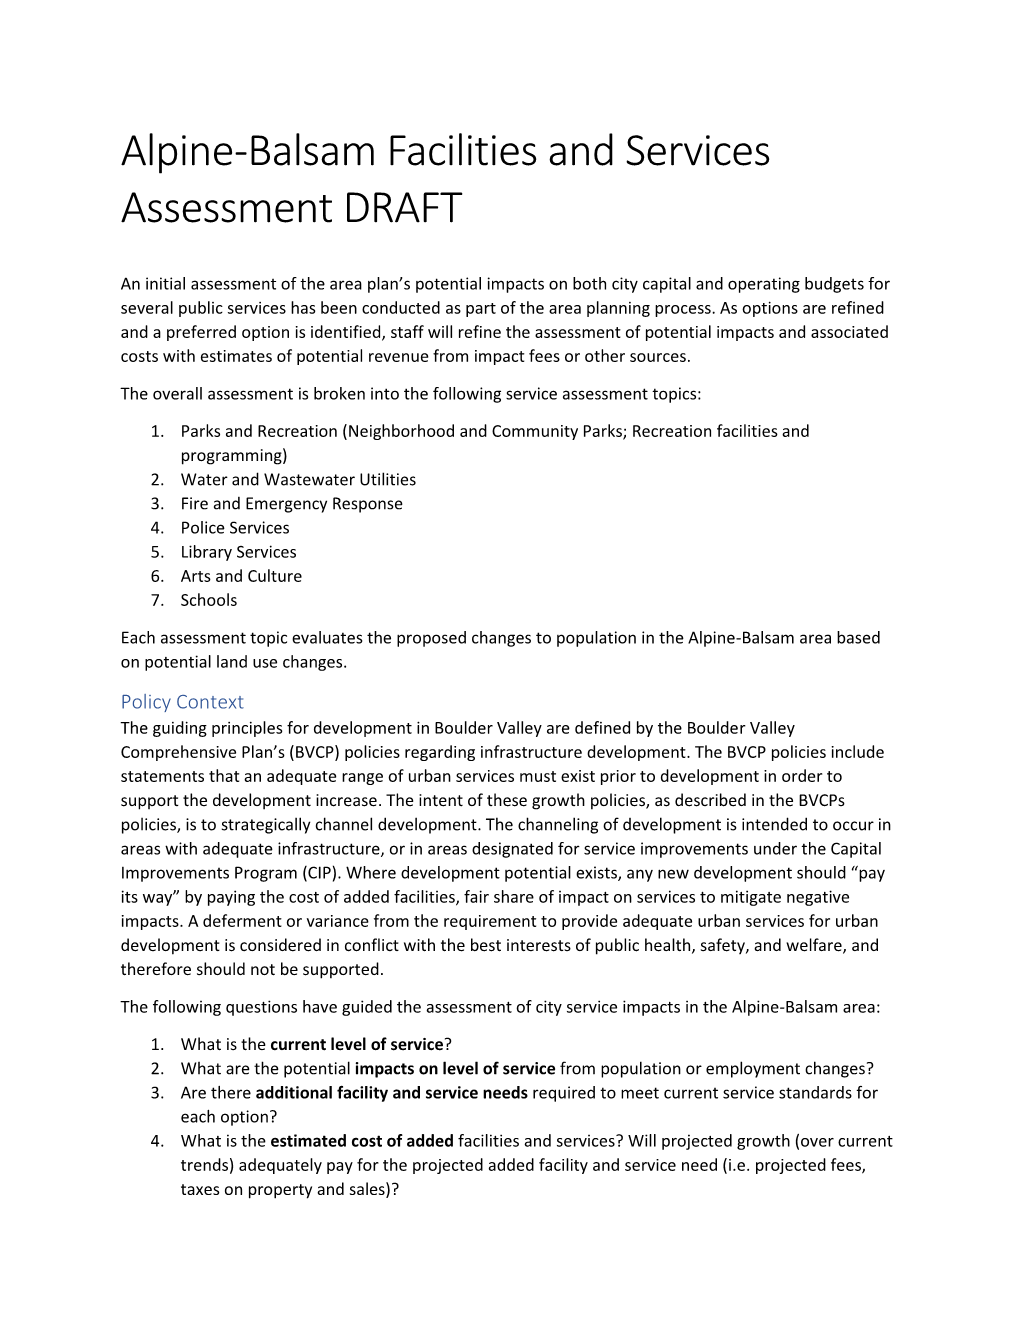 Alpine-Balsam Facilities and Services Assessment DRAFT